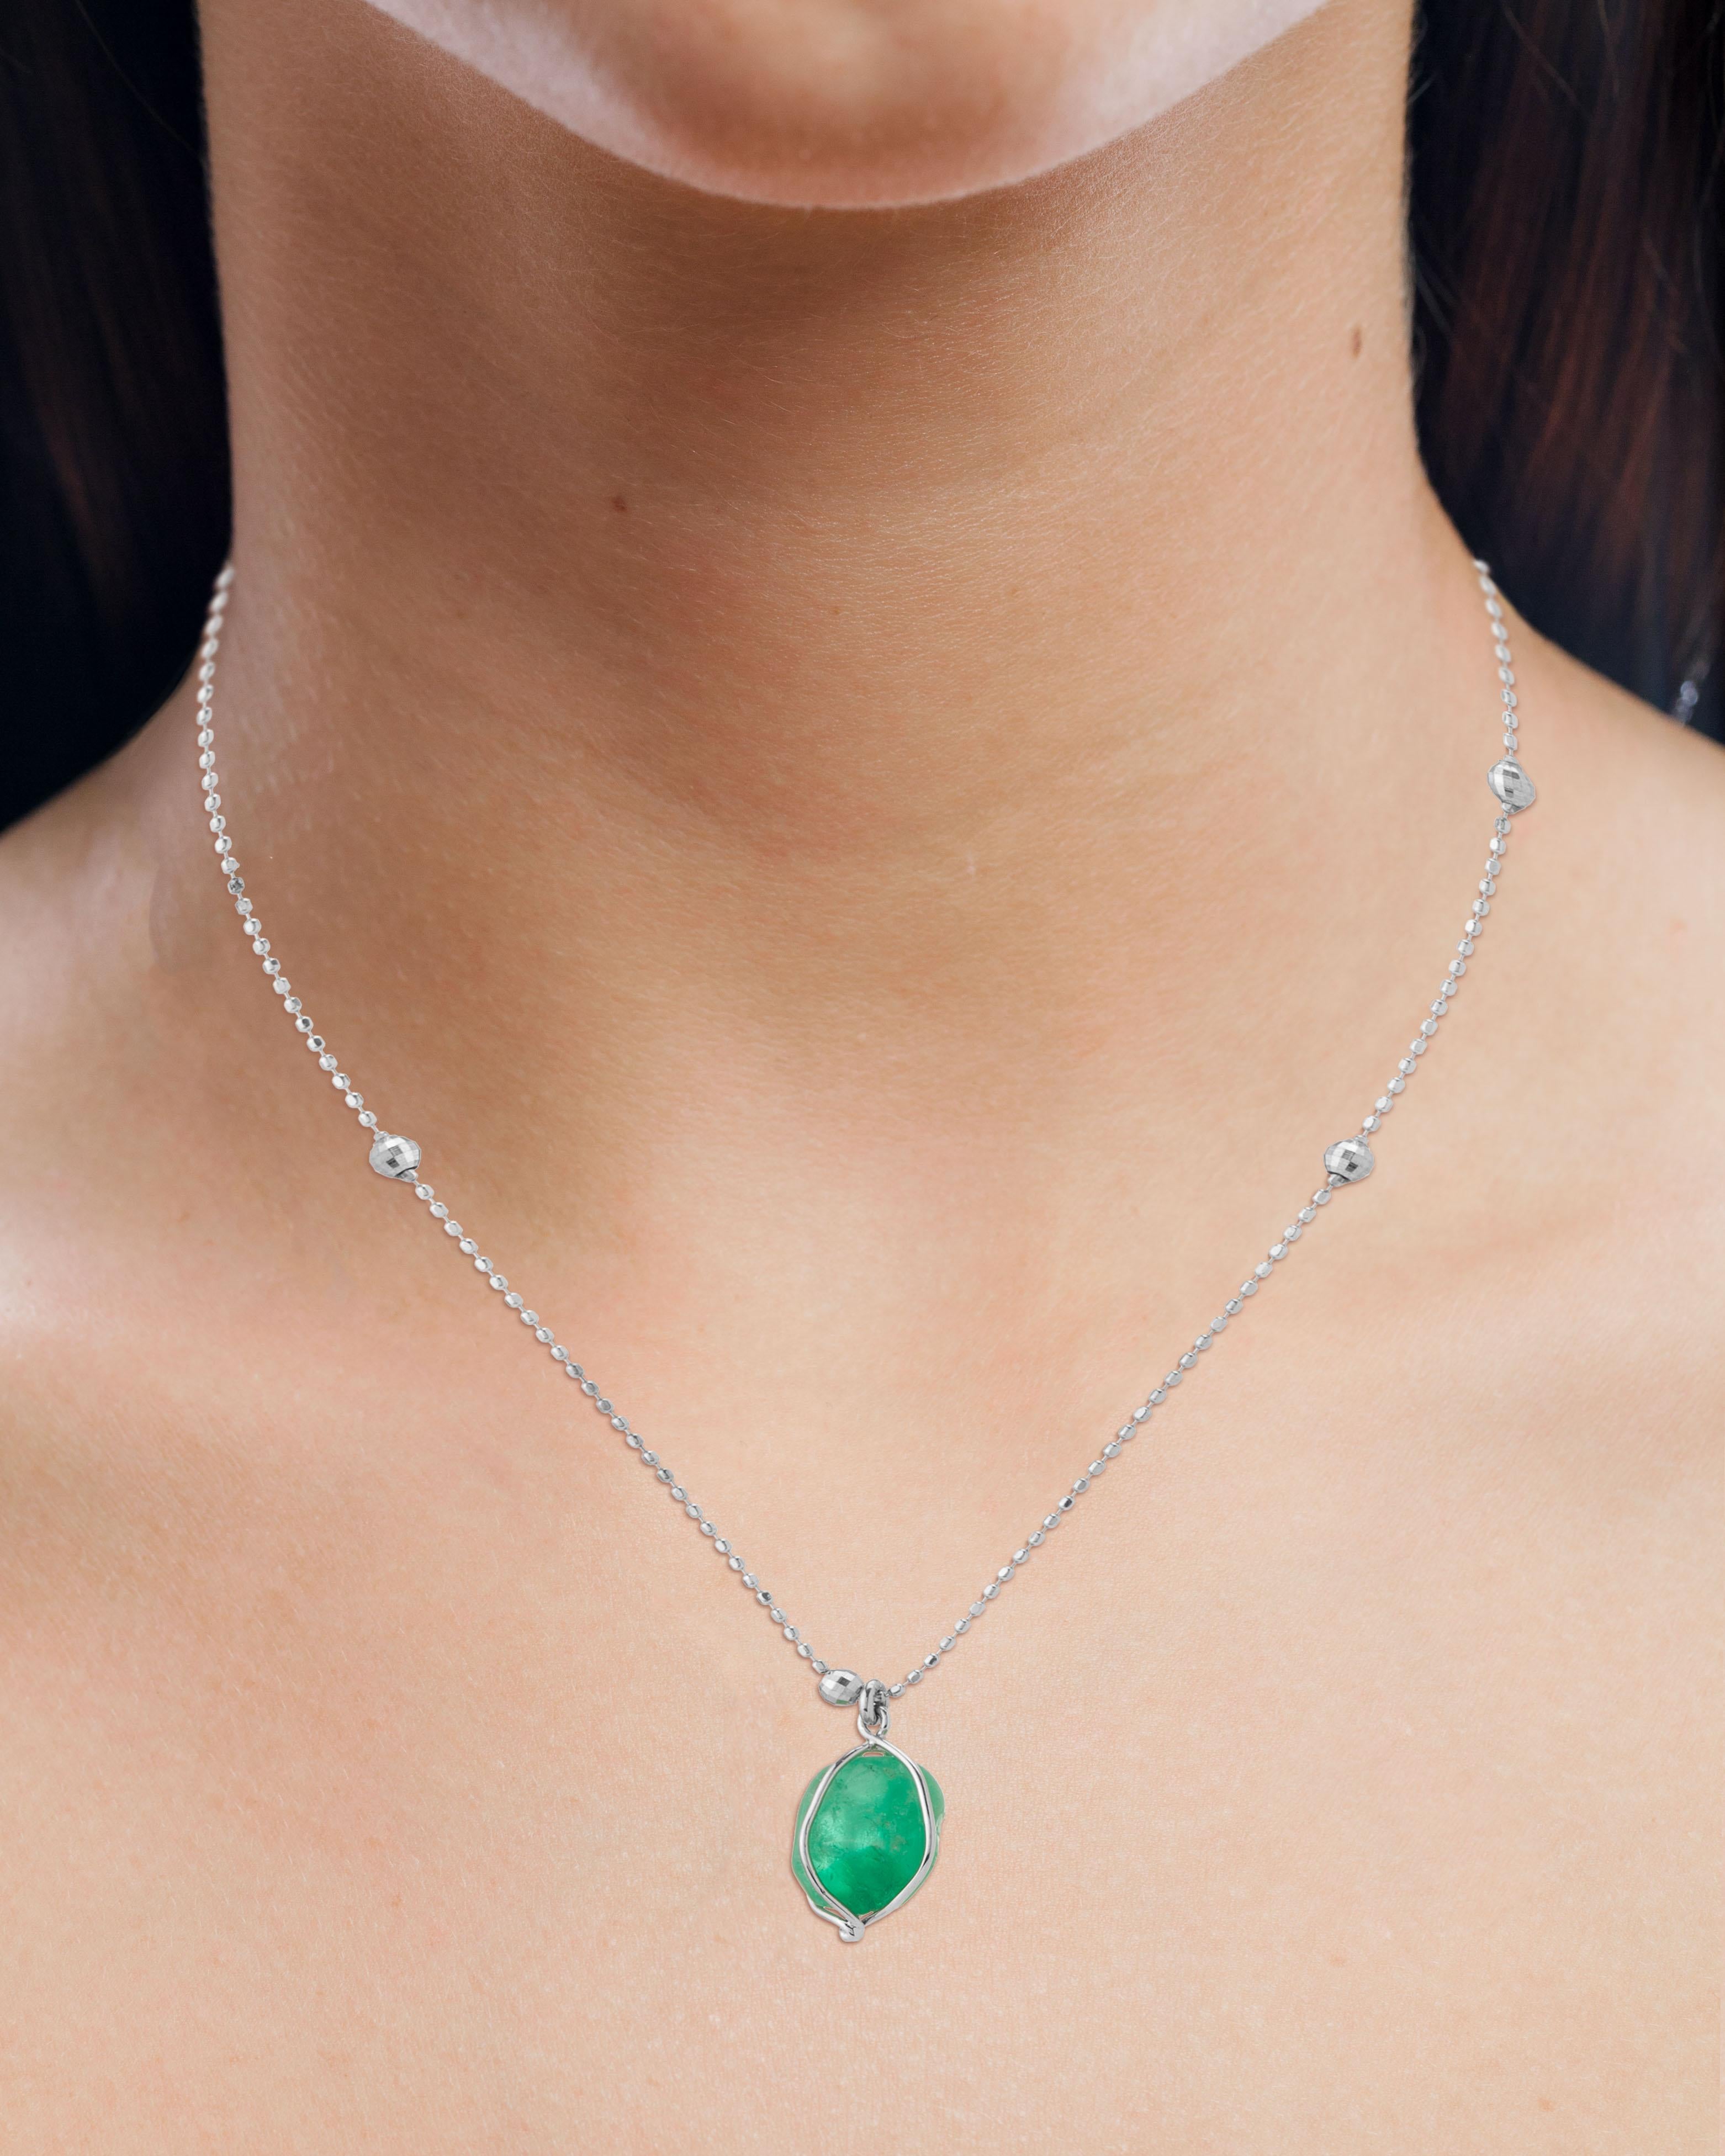 Muzo Emerald Colombia Heritage Chakana Pendant set with 4.31 carats Emerald

Chakana takes its name from the sacred and mysterious Inca cross, representing three worlds – 1) stars, heavens and gods, 2) the earthly world and 3) the underworld –and a